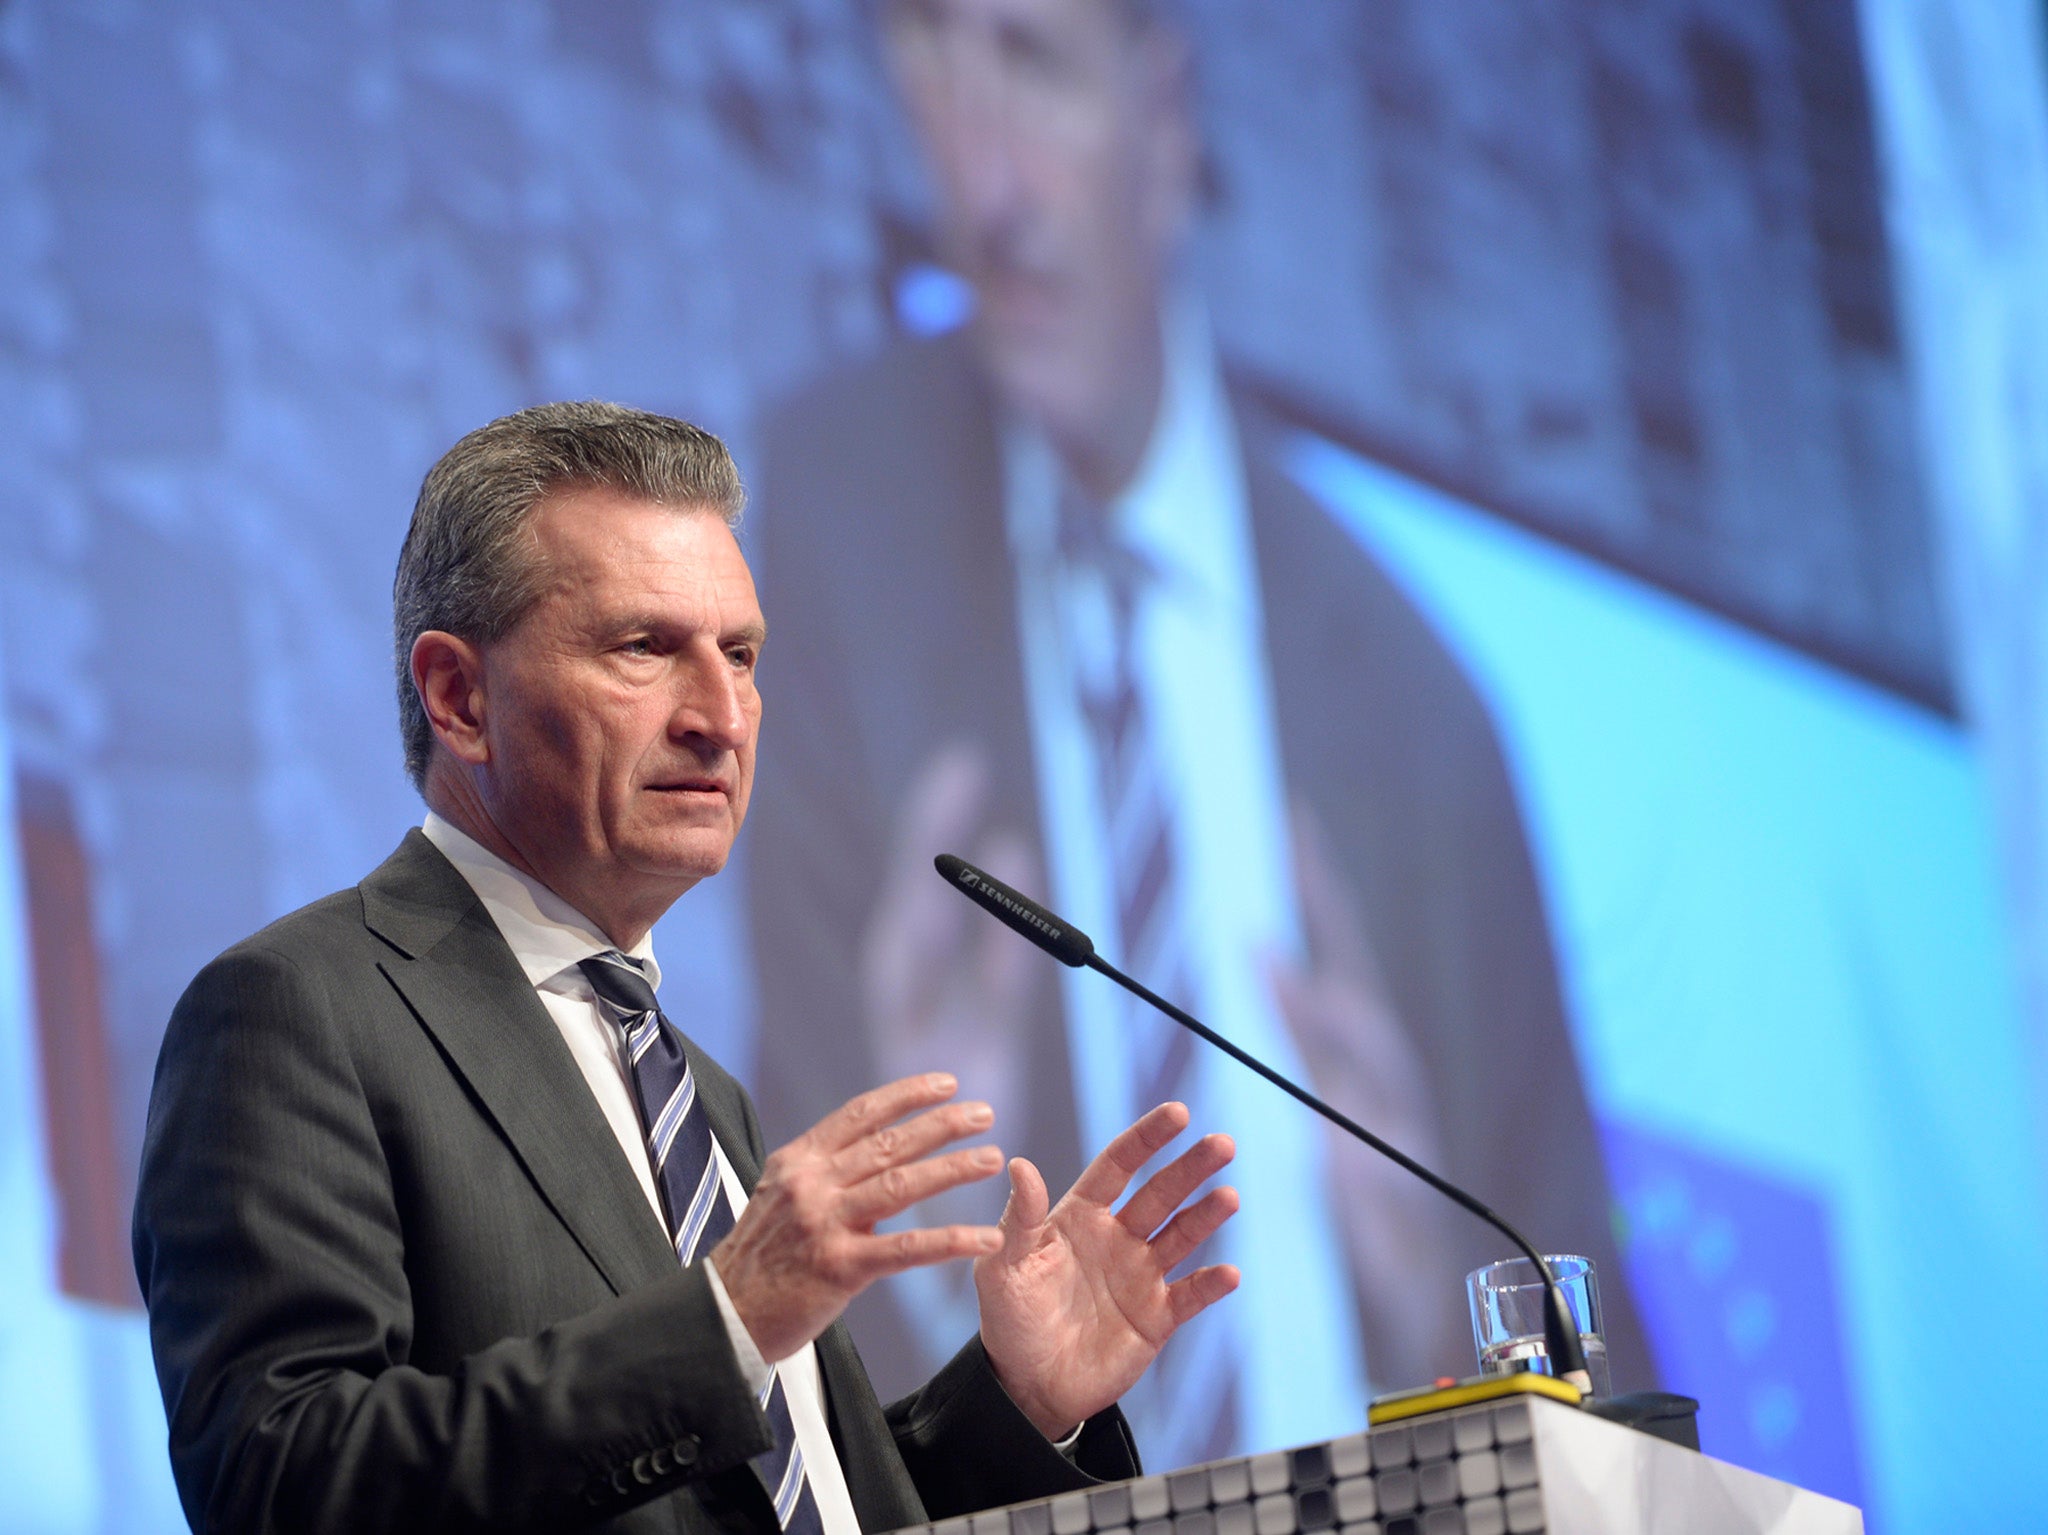 EU Commissioner for Digital Economy and Society Günther Oettinger speaking at an event in Hanover, Germany